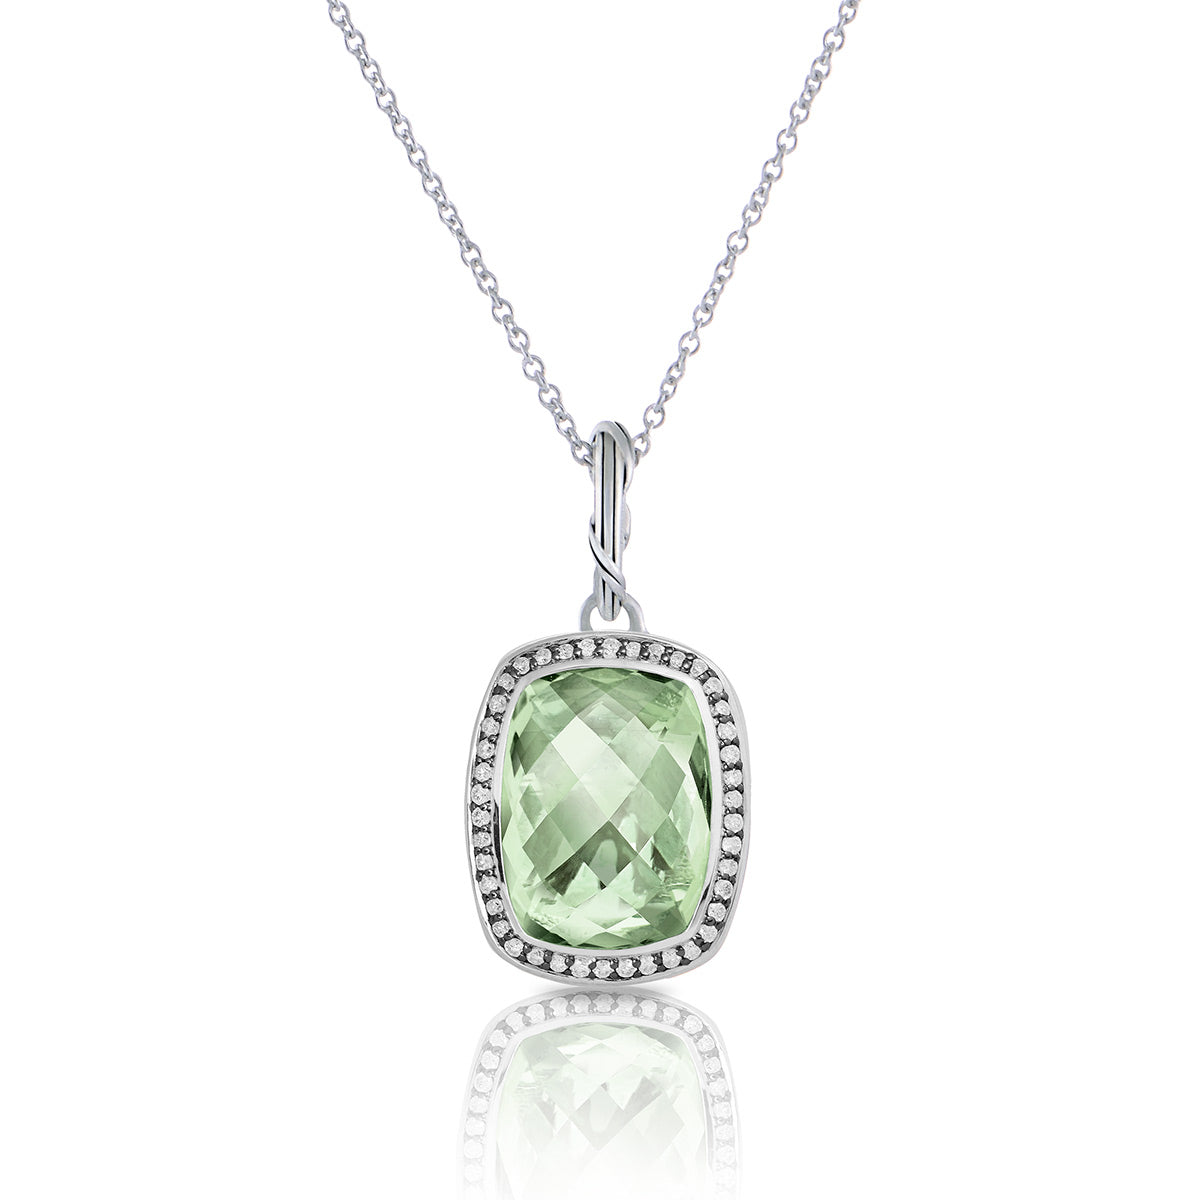 Fantasies Prasiolite Halo Pendant Necklace in sterling silver with white topaz